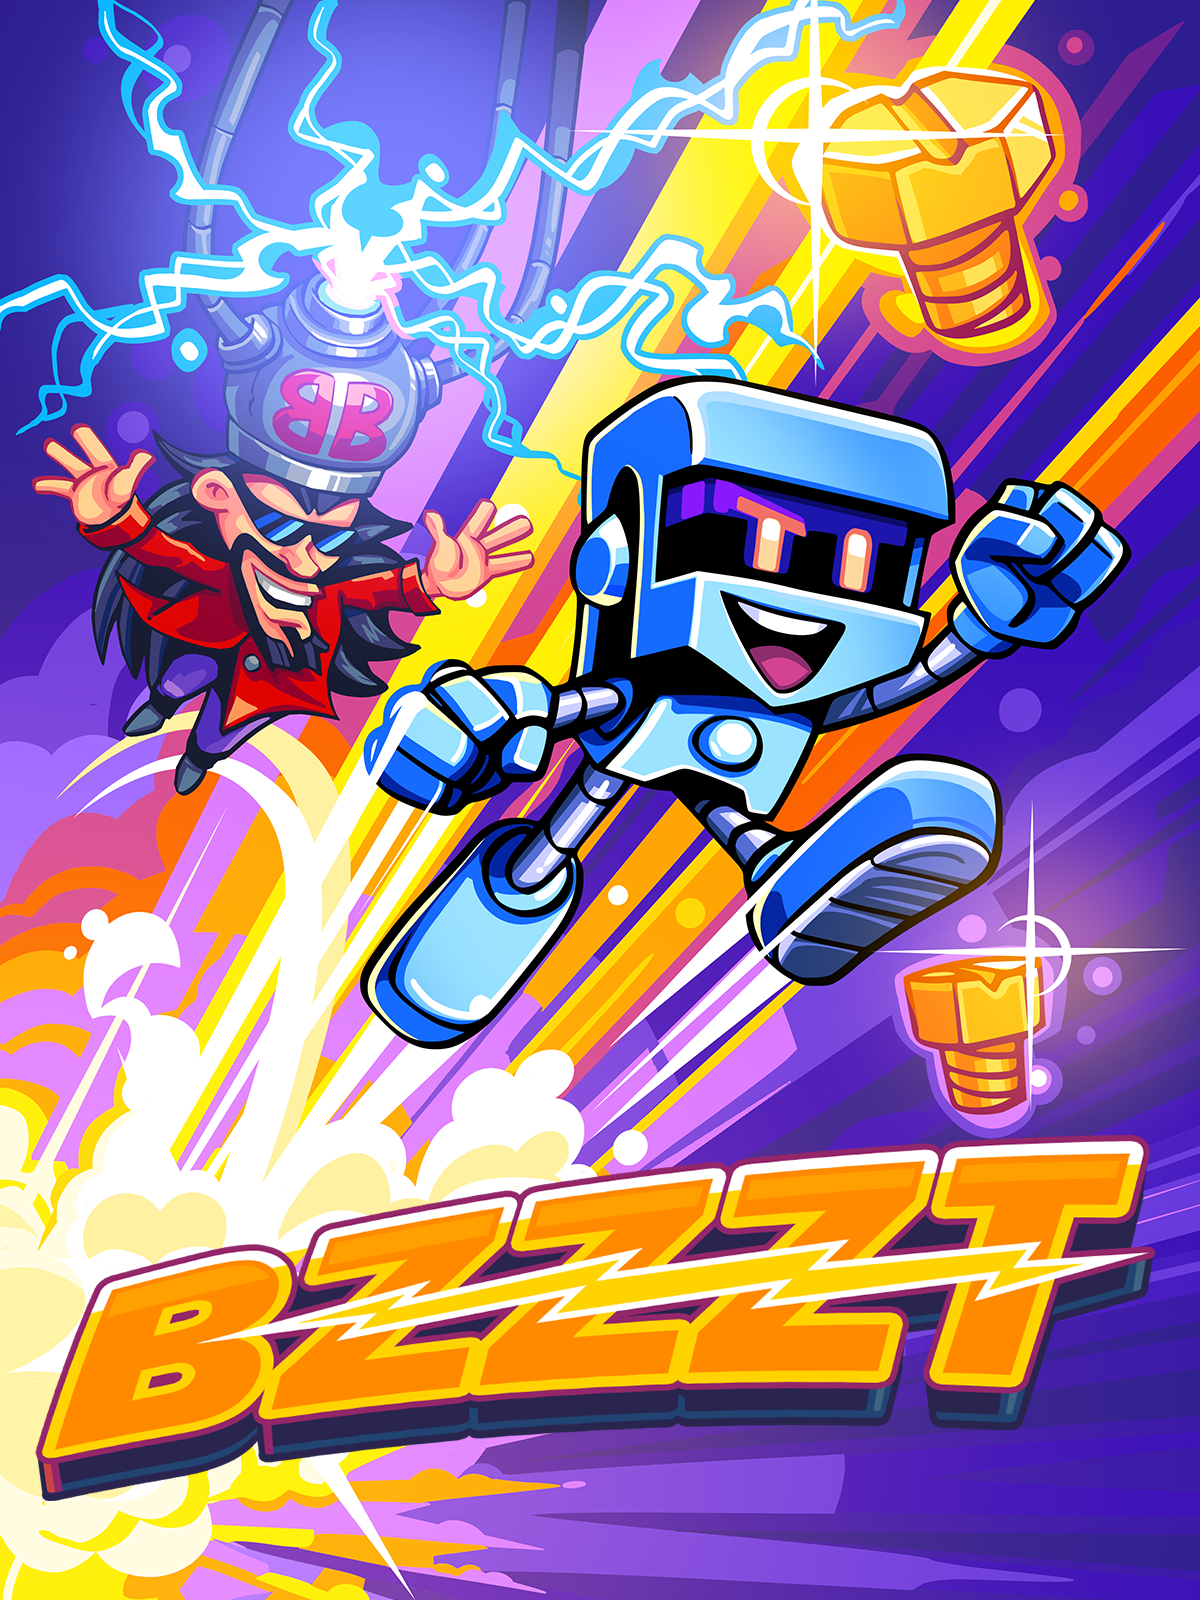 Game image - Bzzzt 